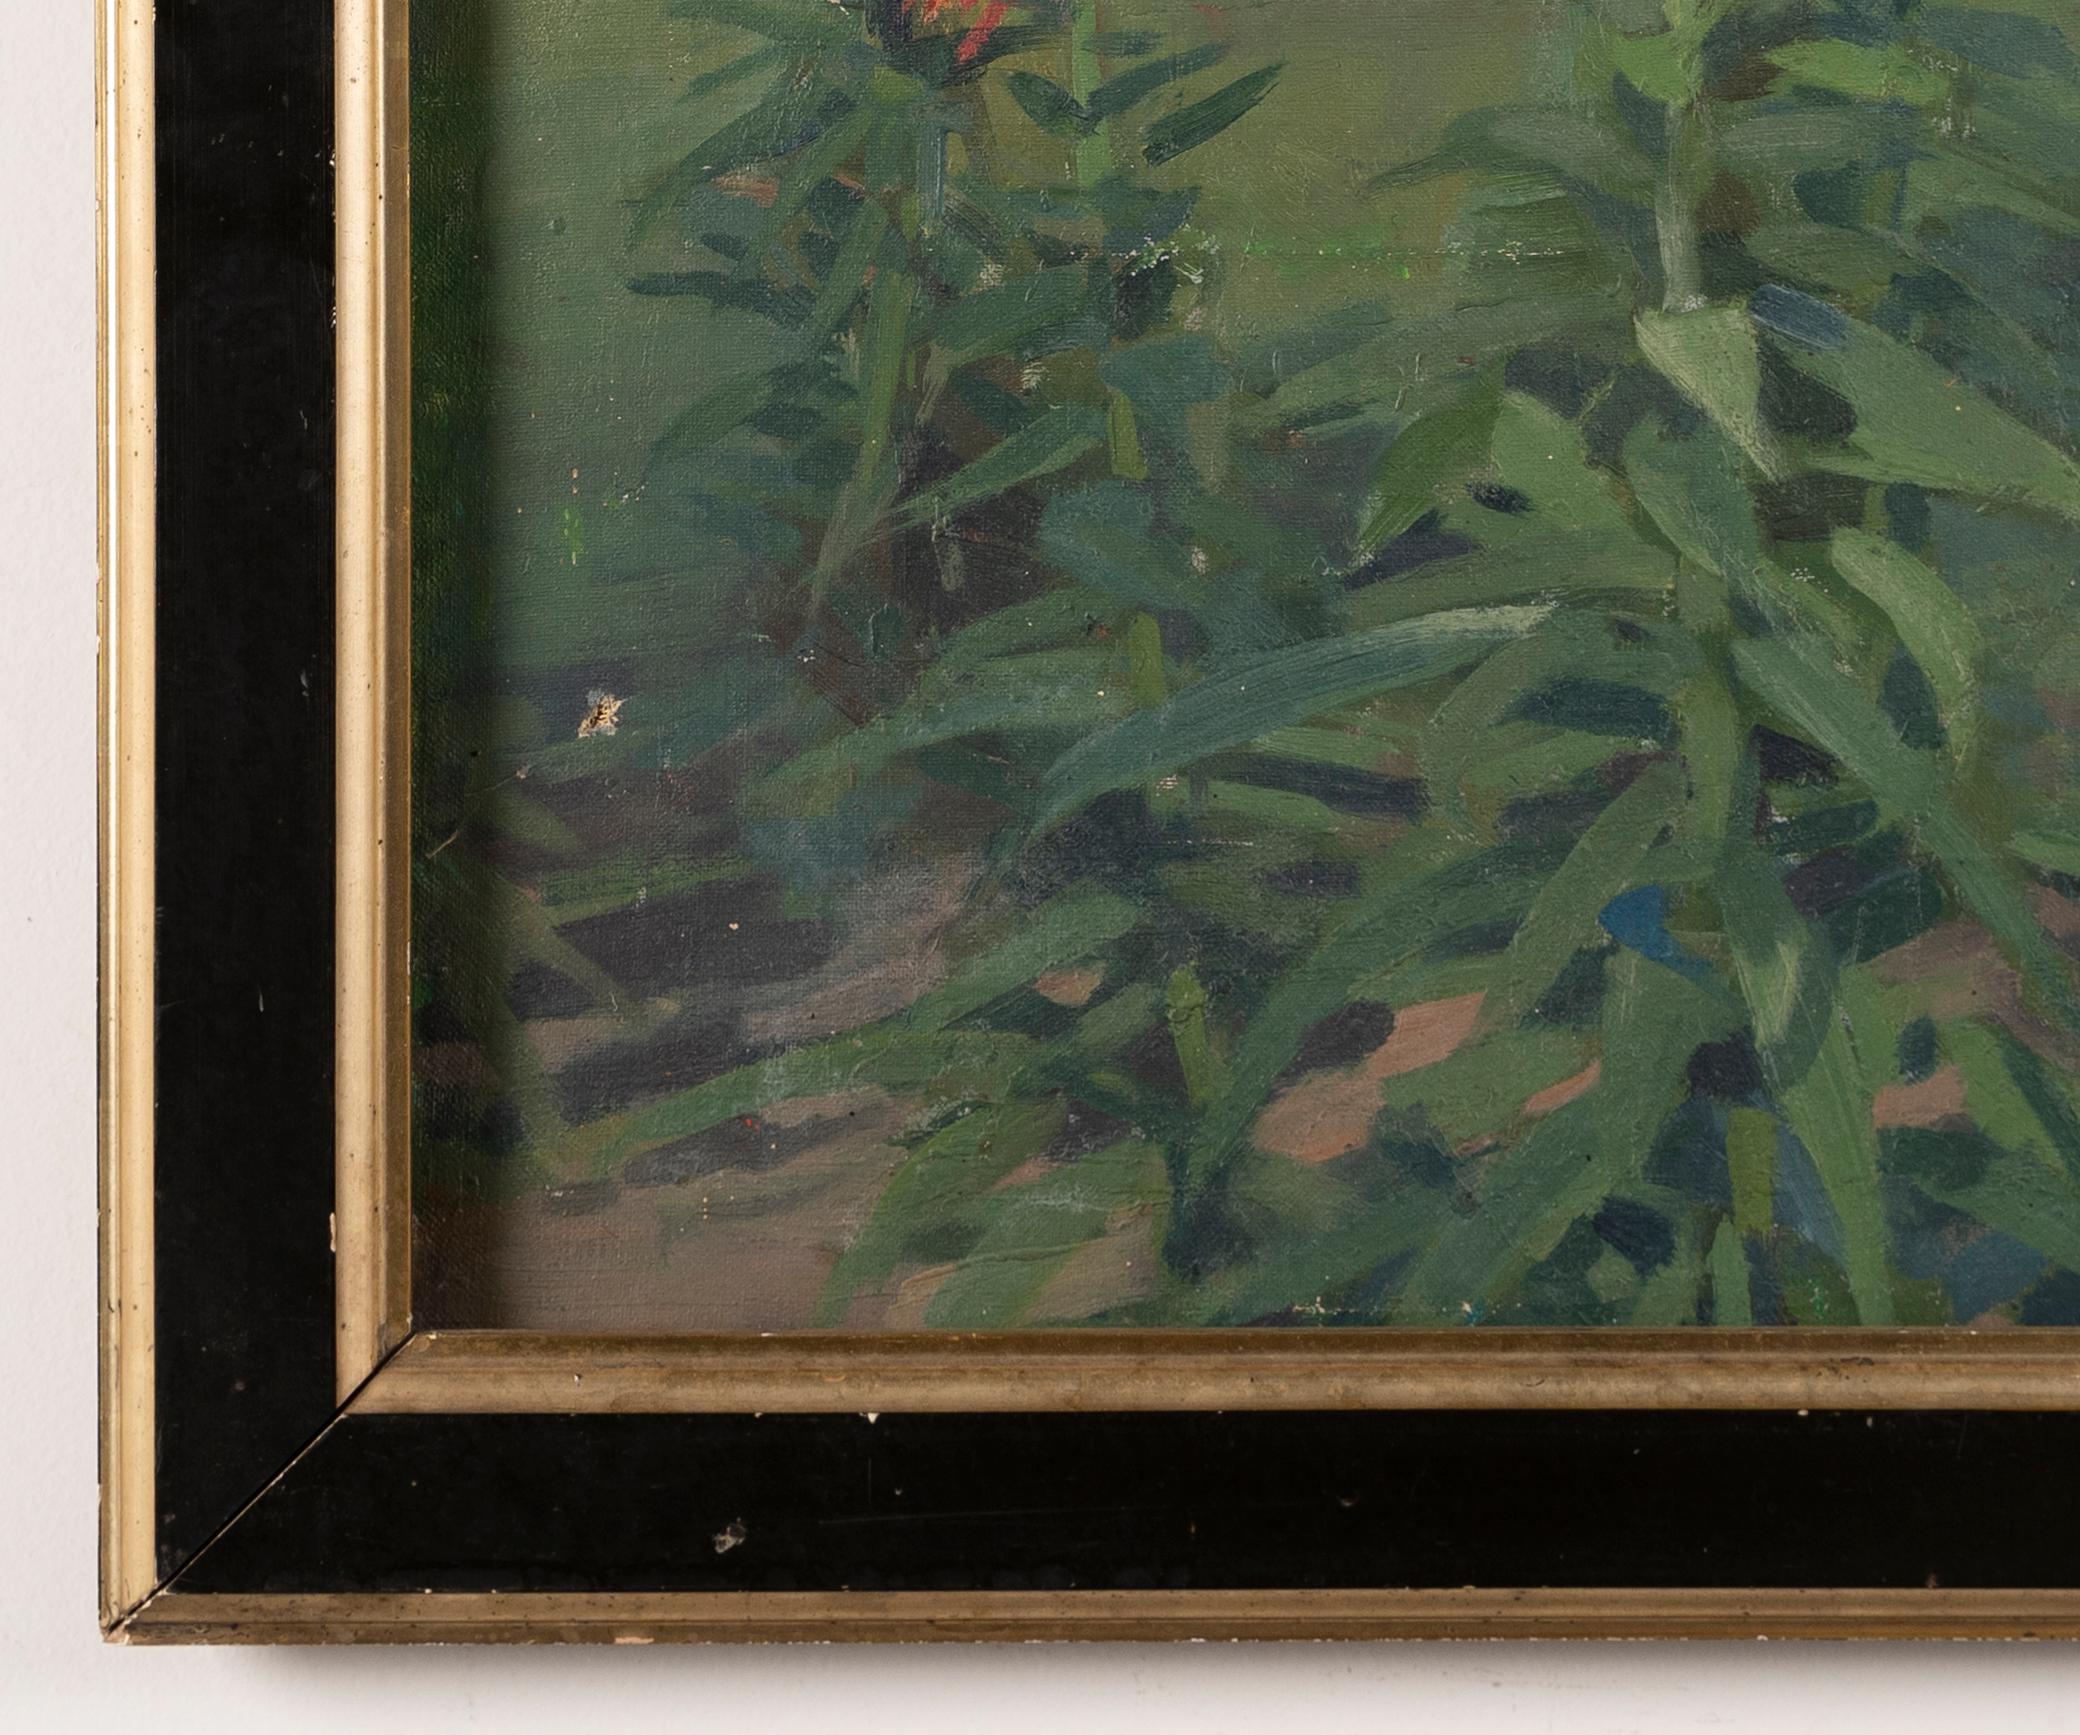 Antique American modernist flower still life oil painting.  Oil on canvas, circa 1910.  Signed on verso.  Image size, 18L x 23H.  Housed in a period frame.